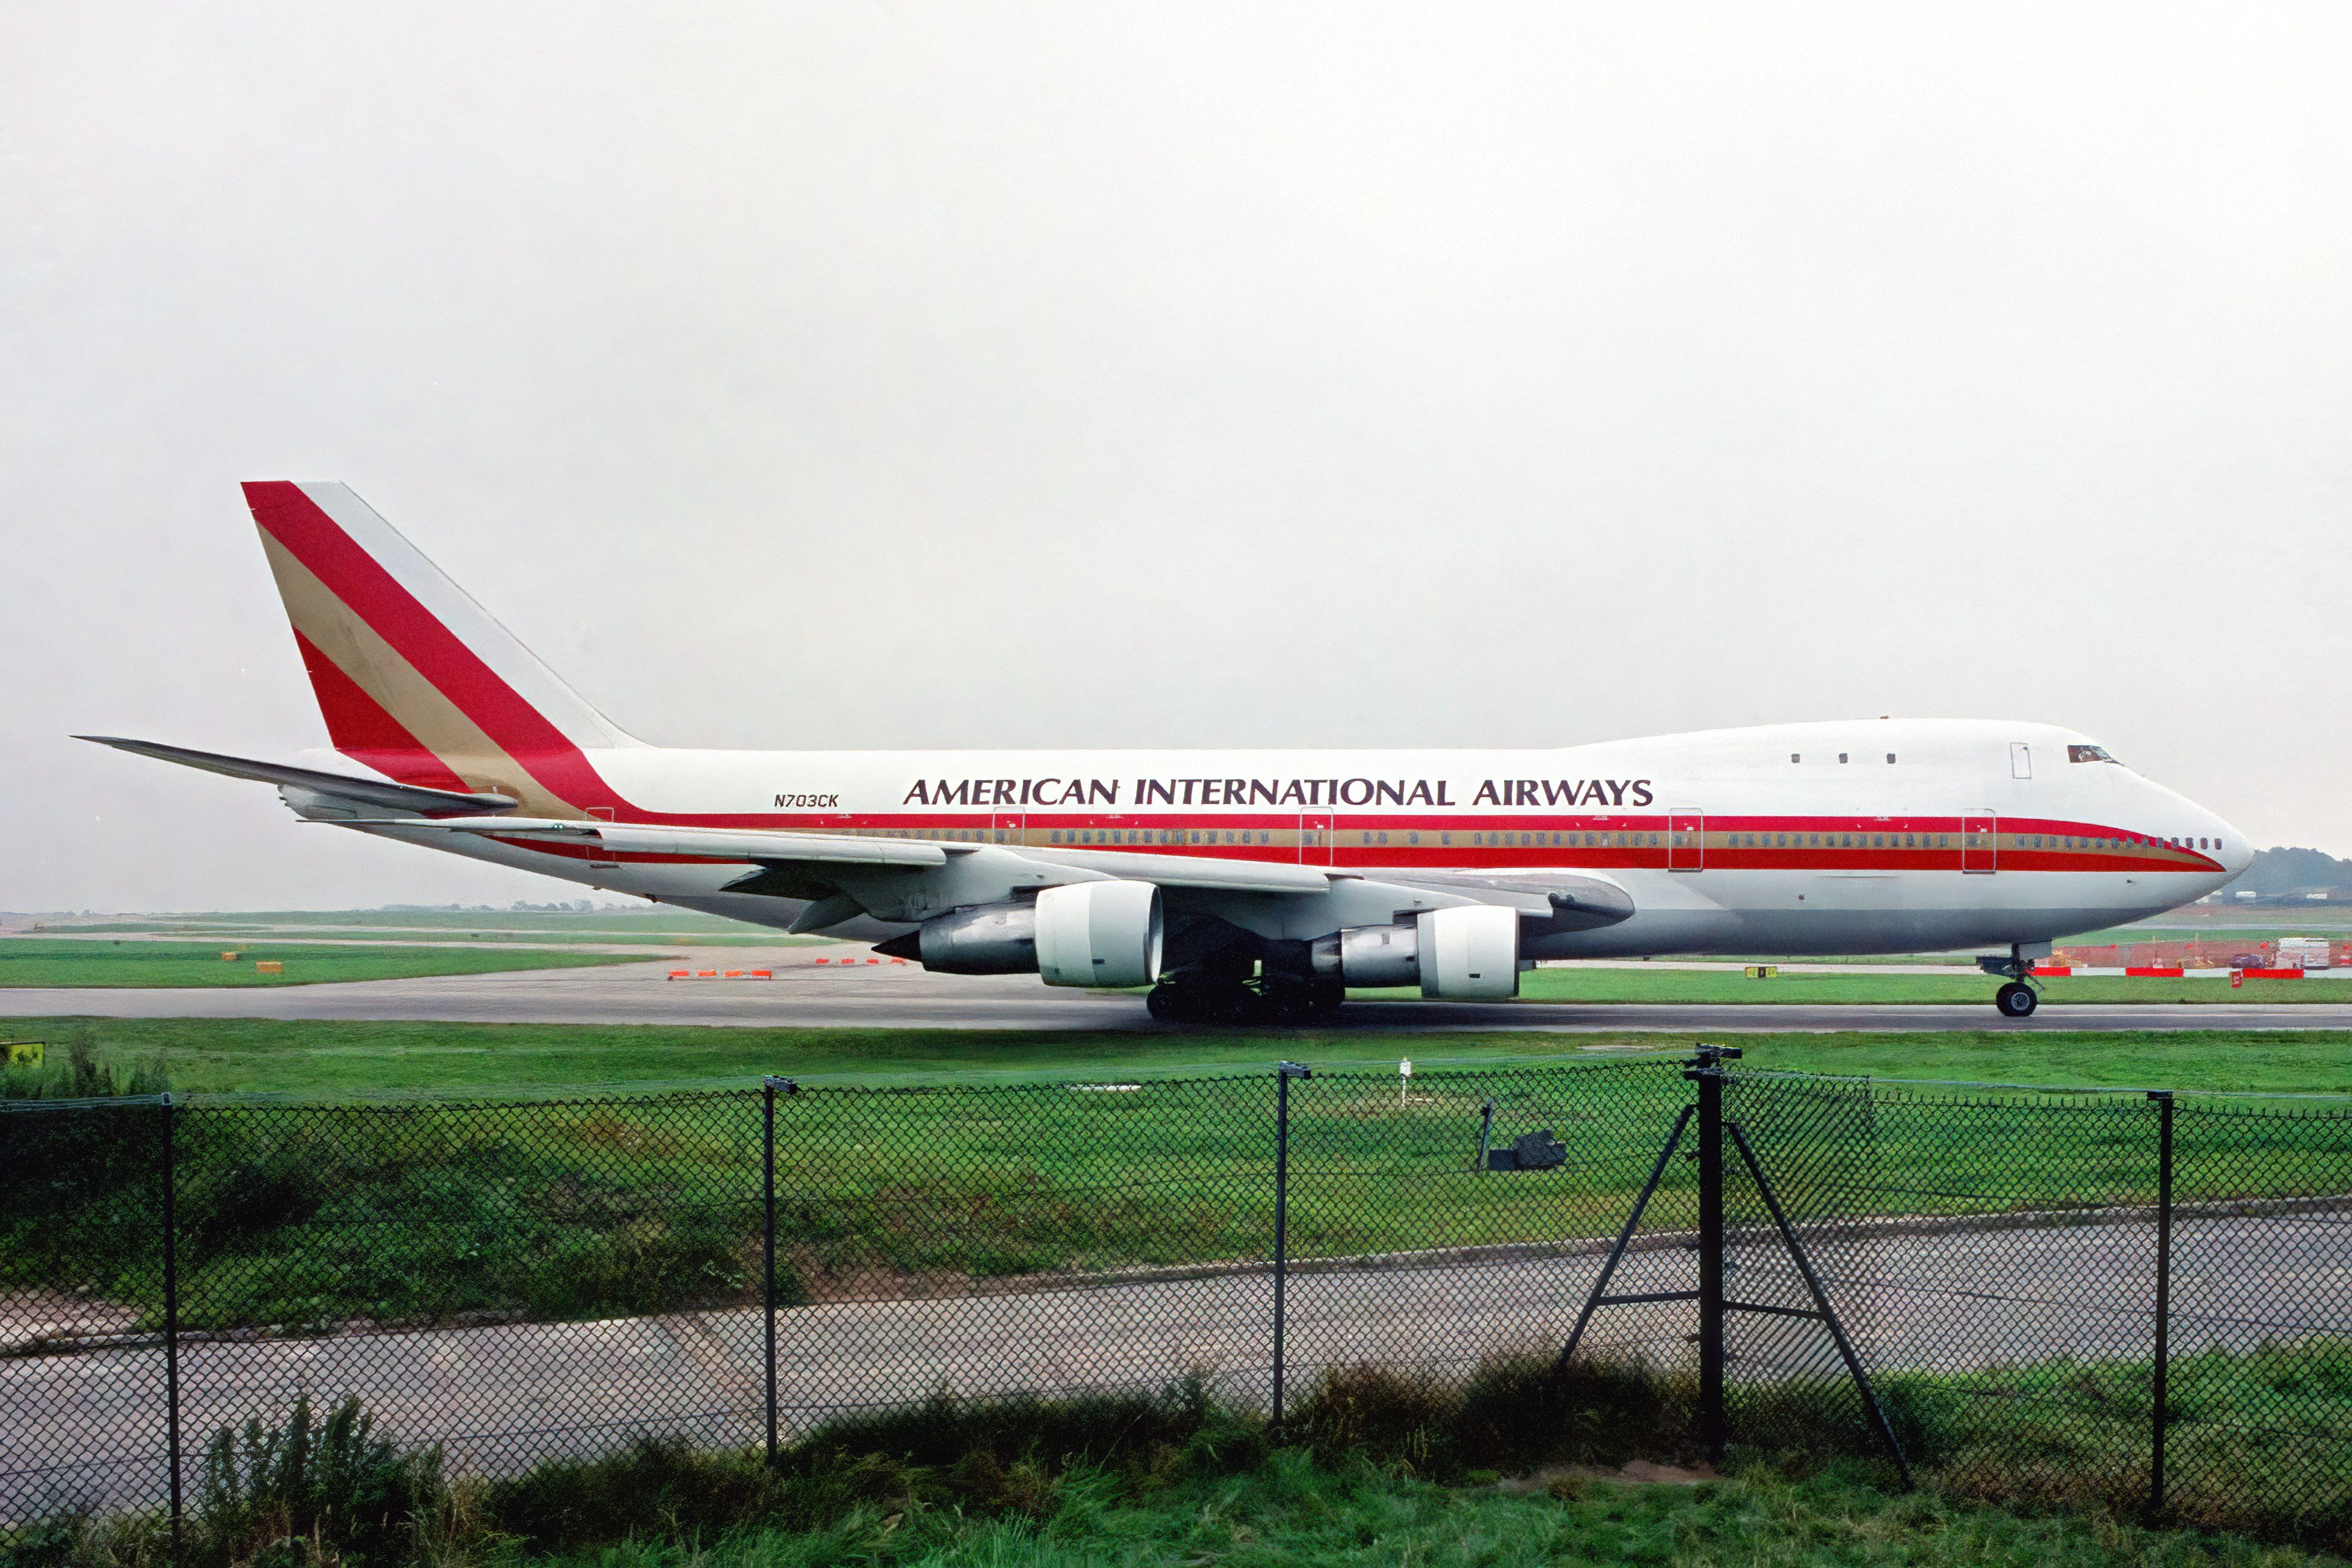 A Kalitta Boeing 747-100 on a taxiway.